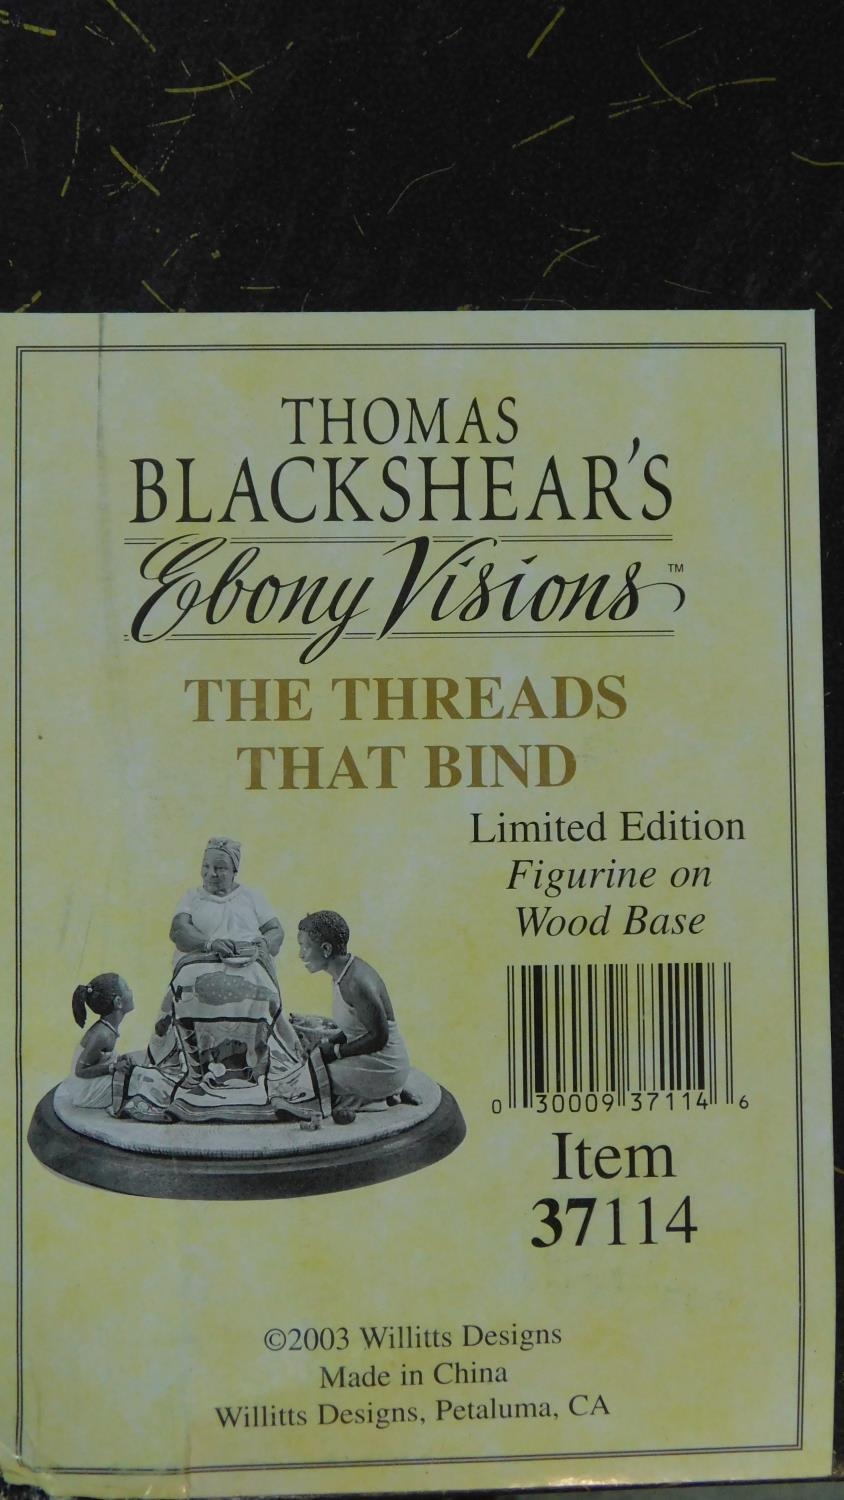 A boxed Thomas Blackshear Ebony Visions "The Threads that Bind" hand painted figure on wooden - Image 12 of 12